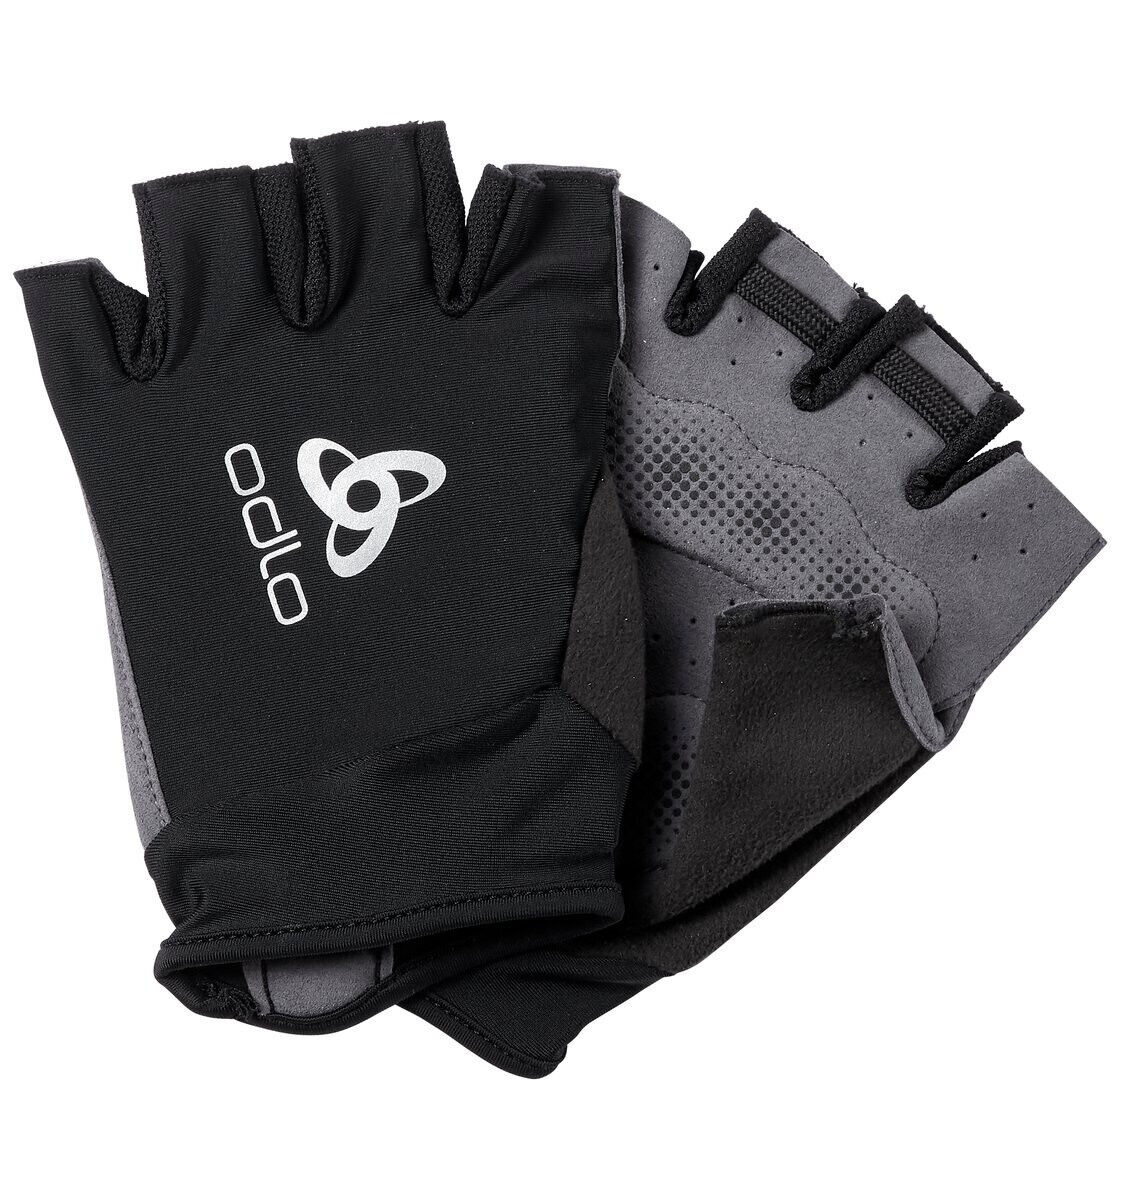 Odlo Gloves Fingerless Active Road - Guanti ciclismo - Uomo